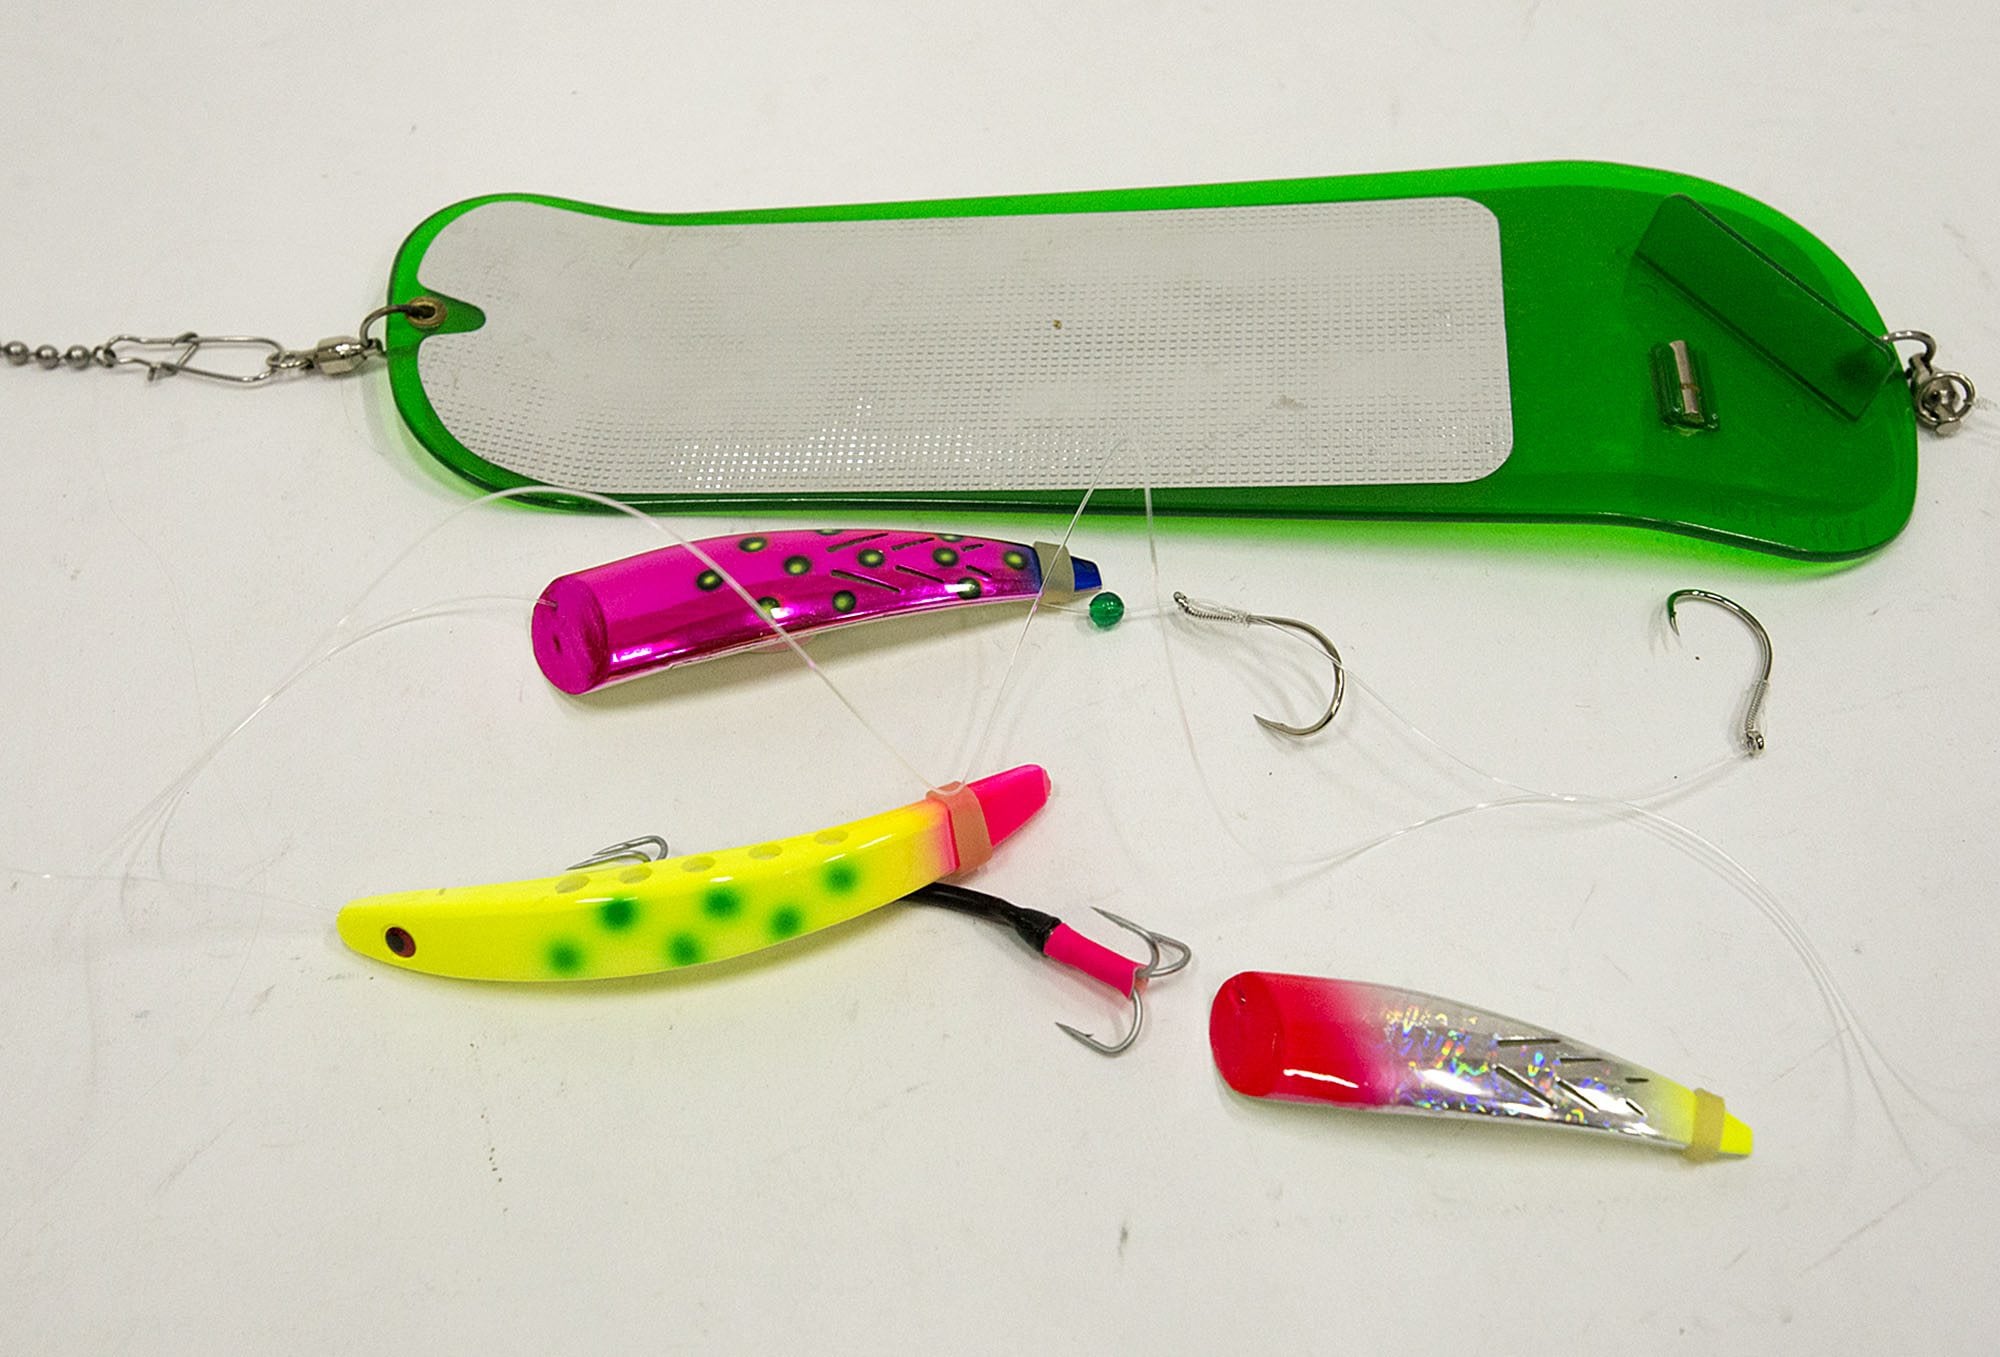 Boat Lure Fishing Products 8 Inch 11inch Trolling Flasher Luminous